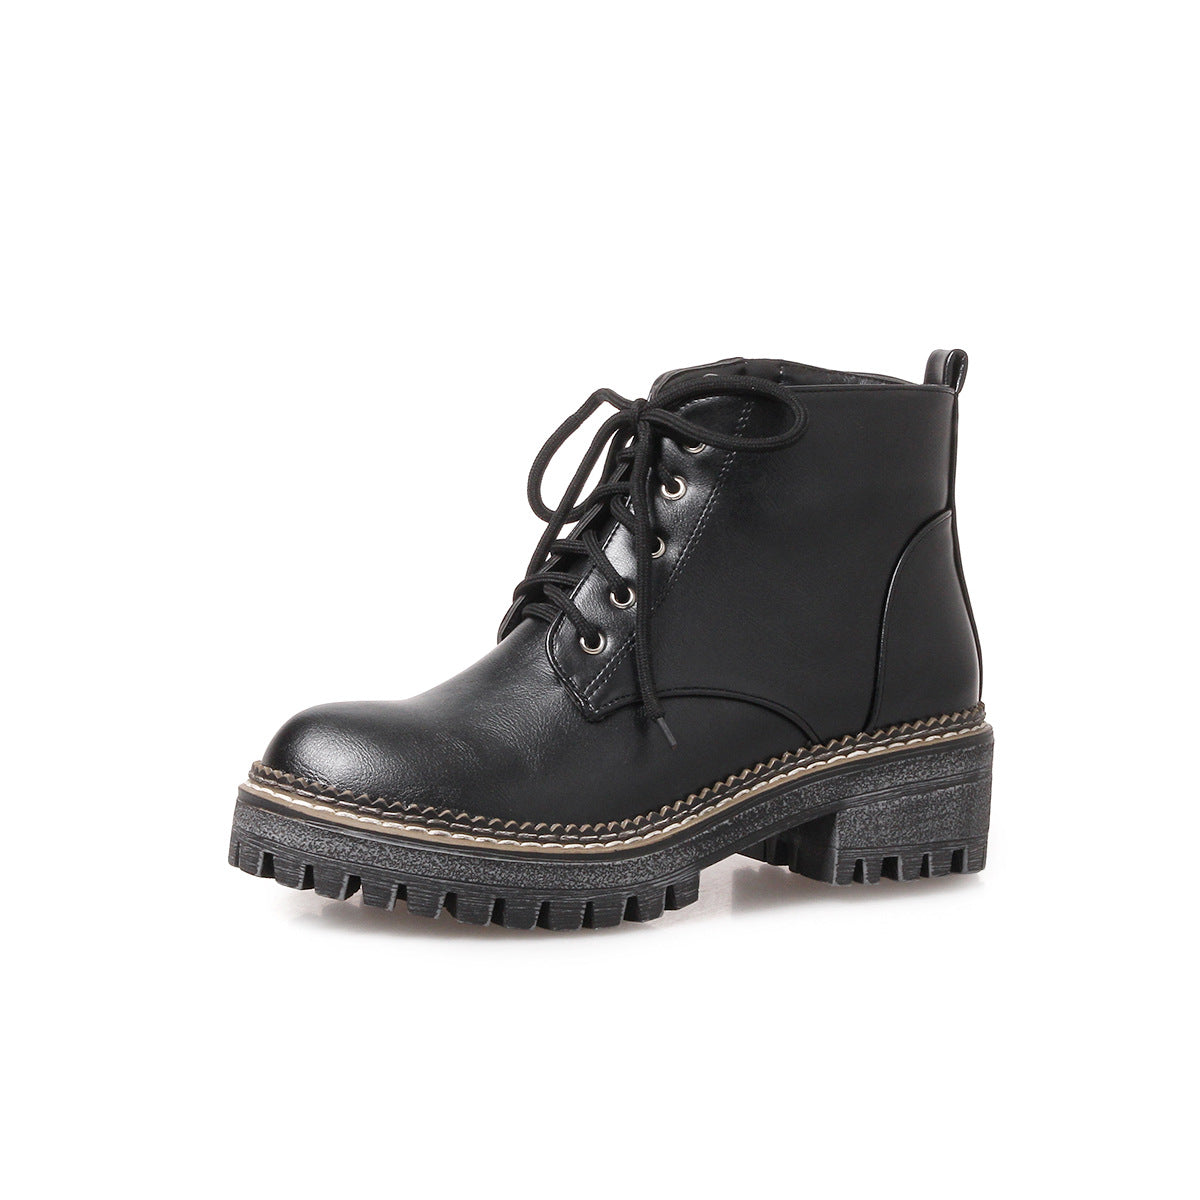 Academic Lace Up Motorcycle Boots Fall/winter Low Heel Ankle Boots